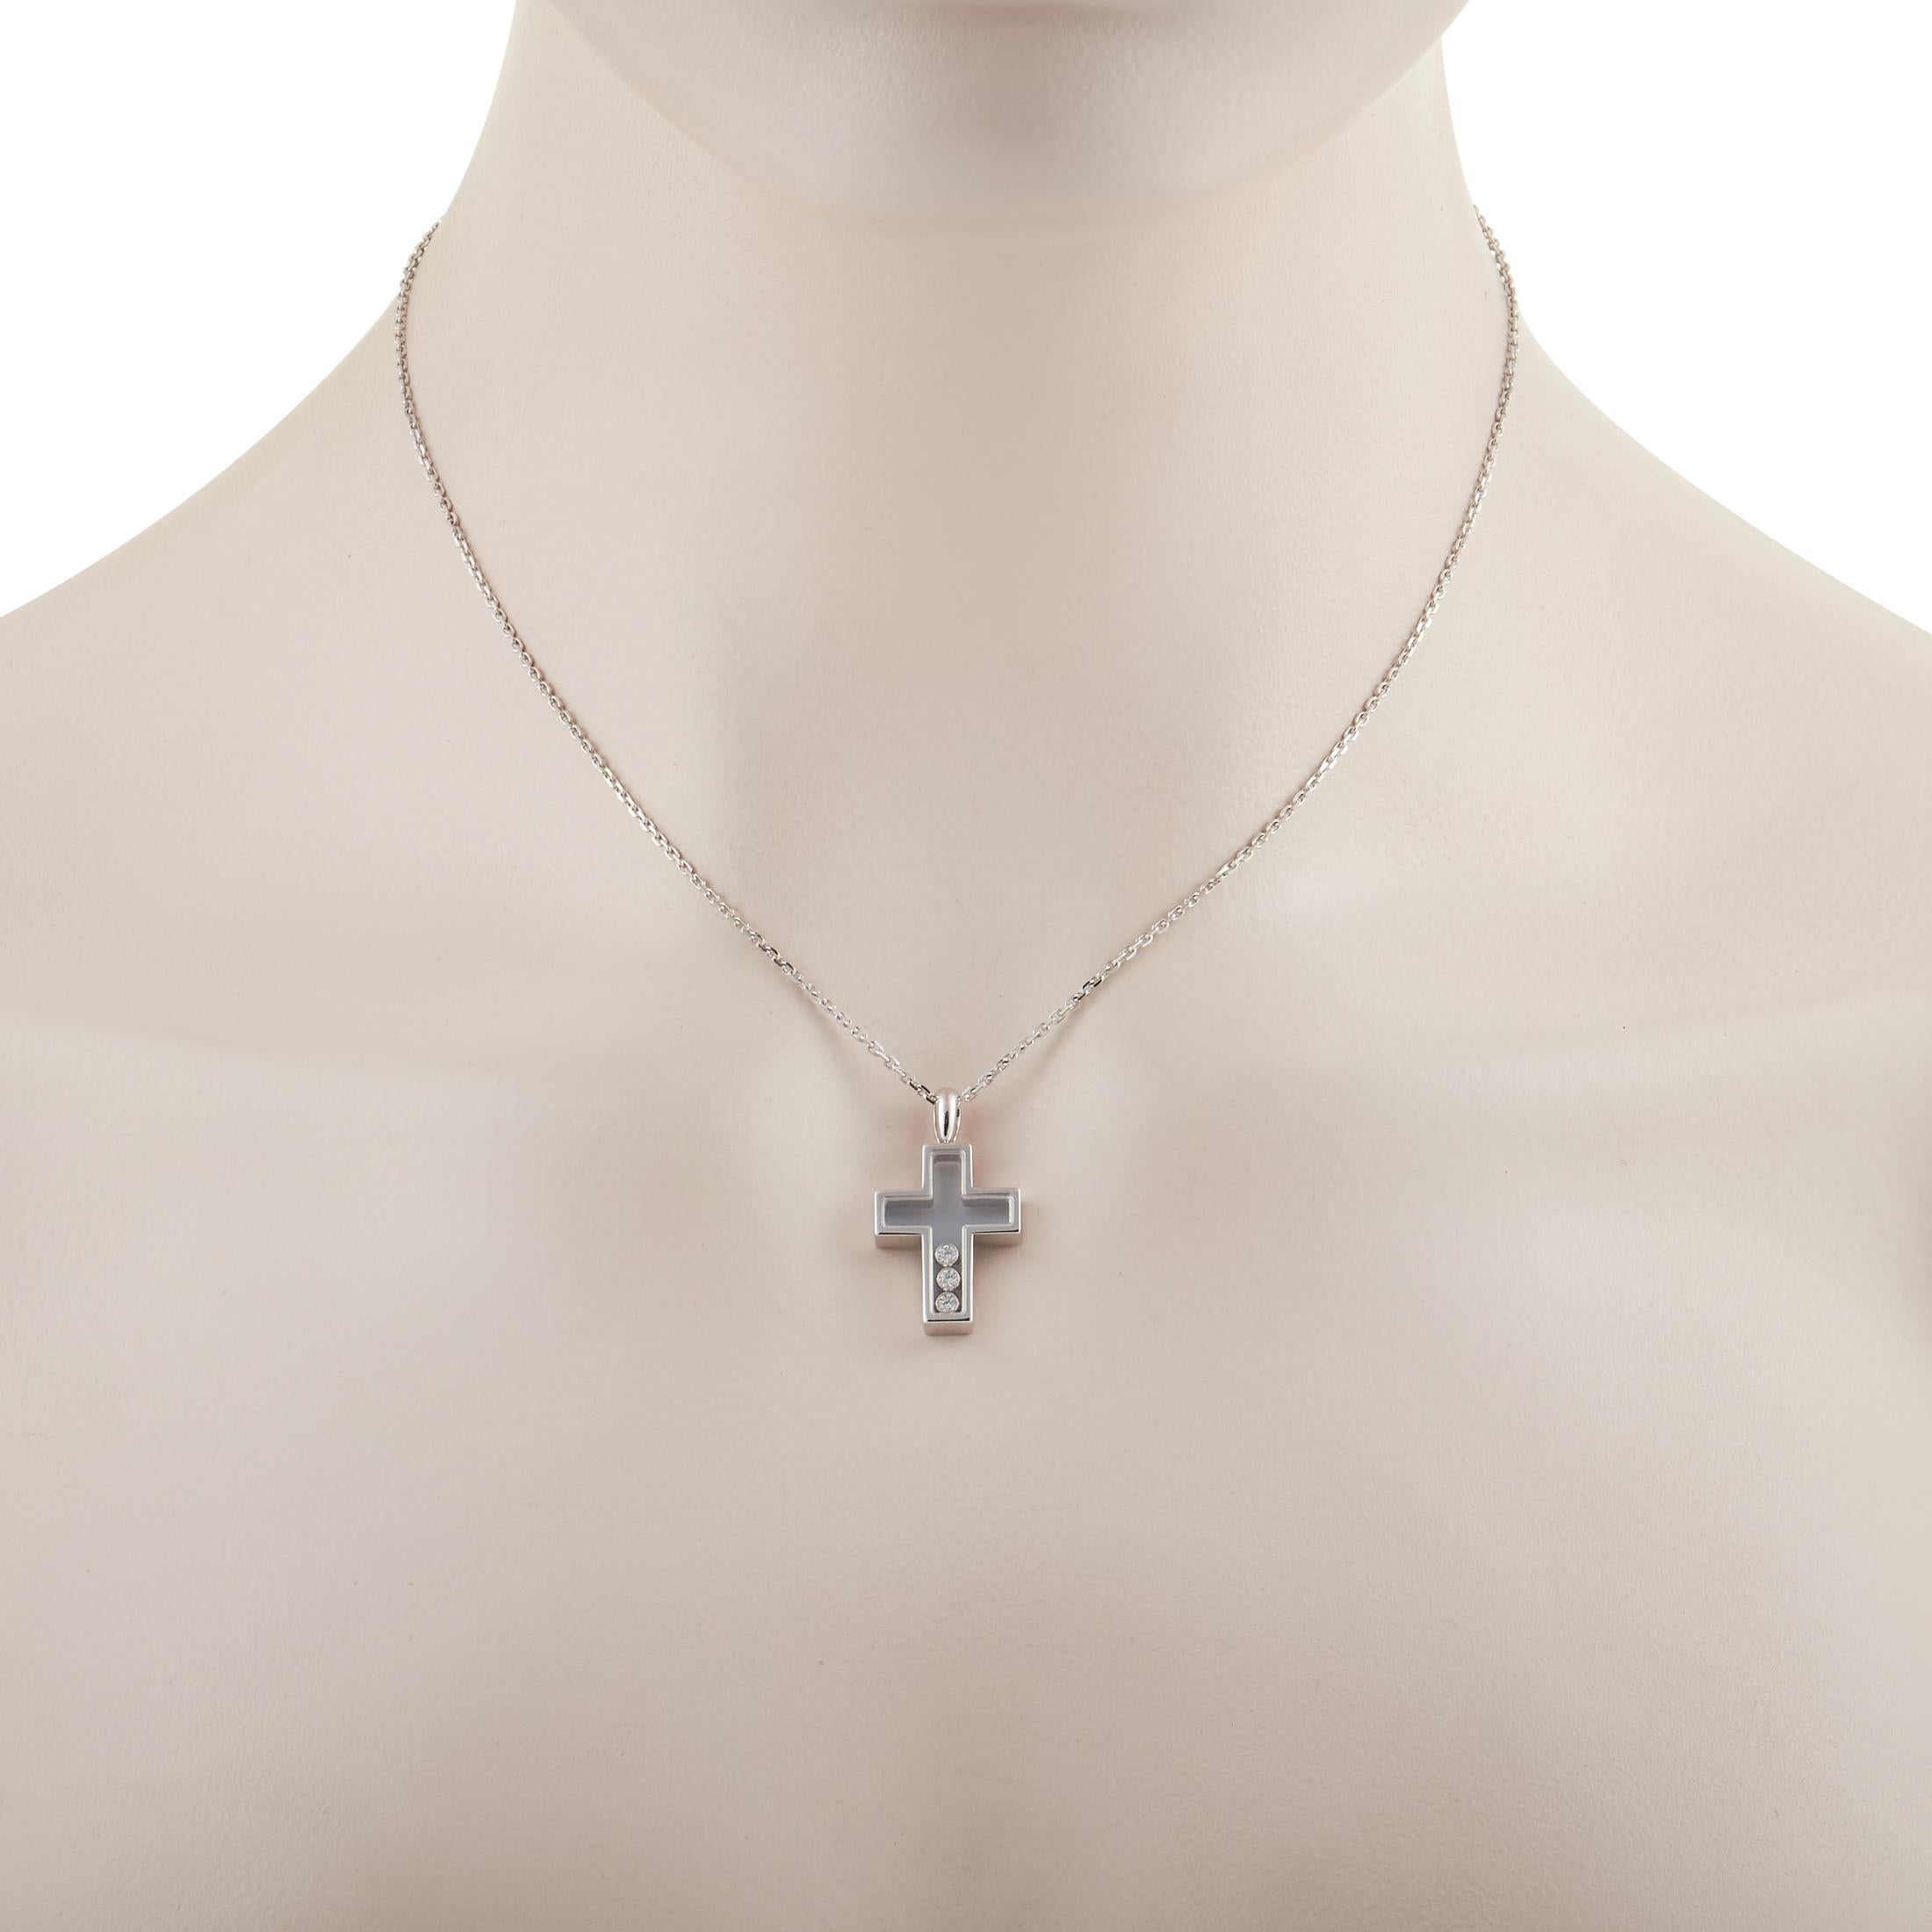 This pendant necklace from Chopard is a creative take on a symbolic piece of jewelry. Suspended from a 16” chain with lobster clasp closure is a transparent 18K White Gold cross-shaped pendant, which includes a trio of diamonds captured within. The